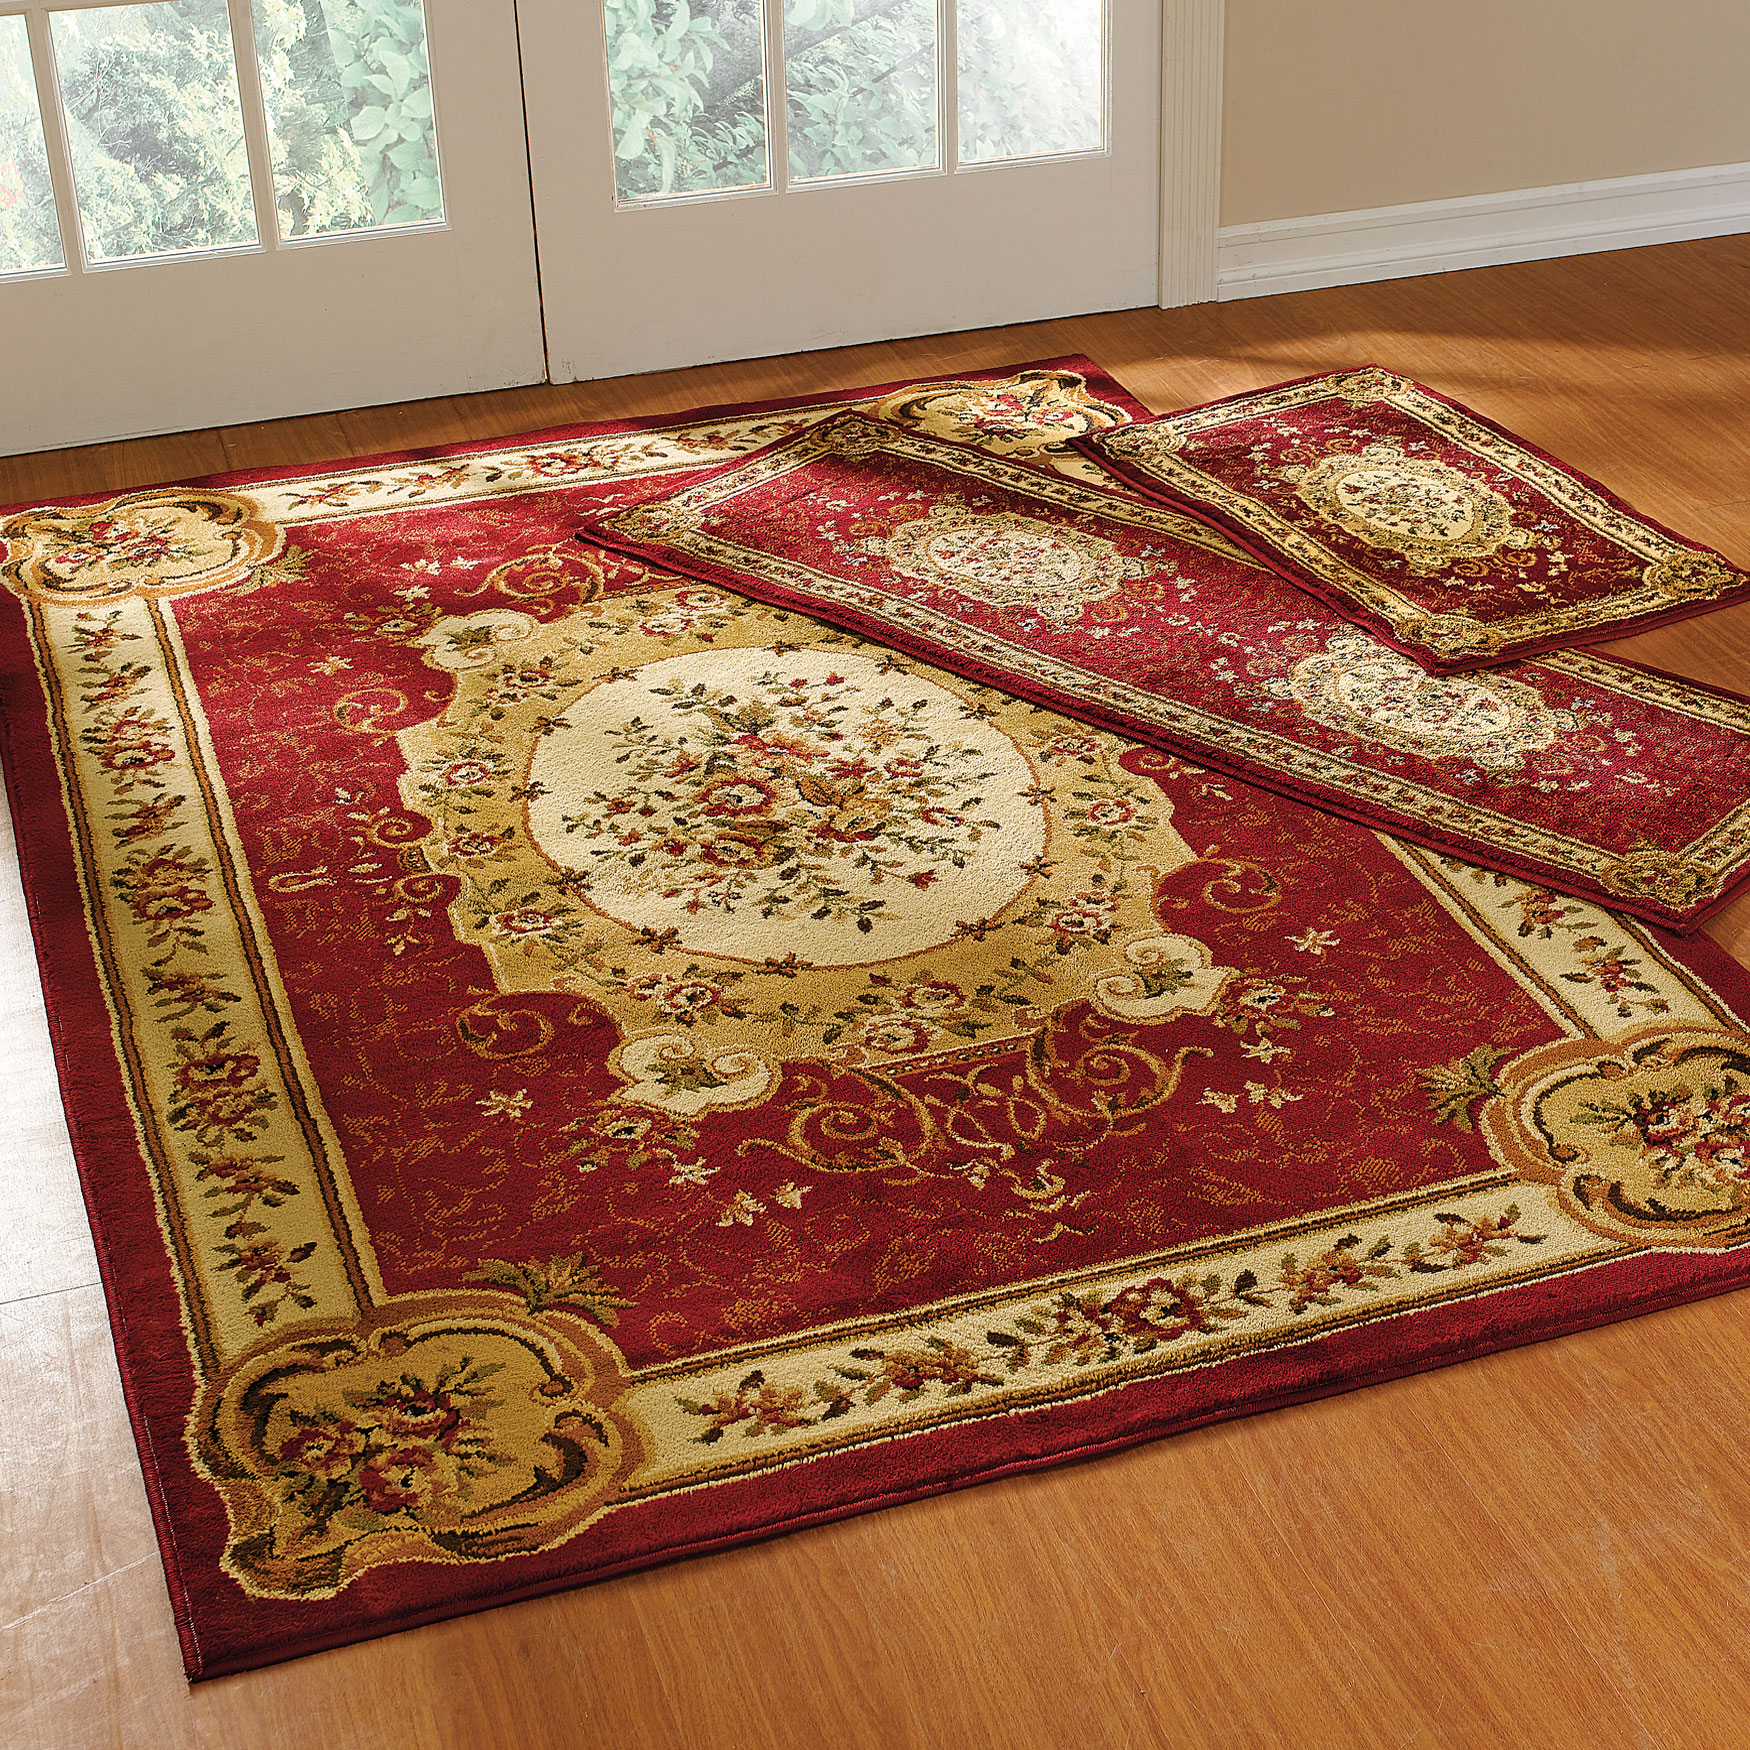 Floral 3-Pc. Rug Set with Runner, 